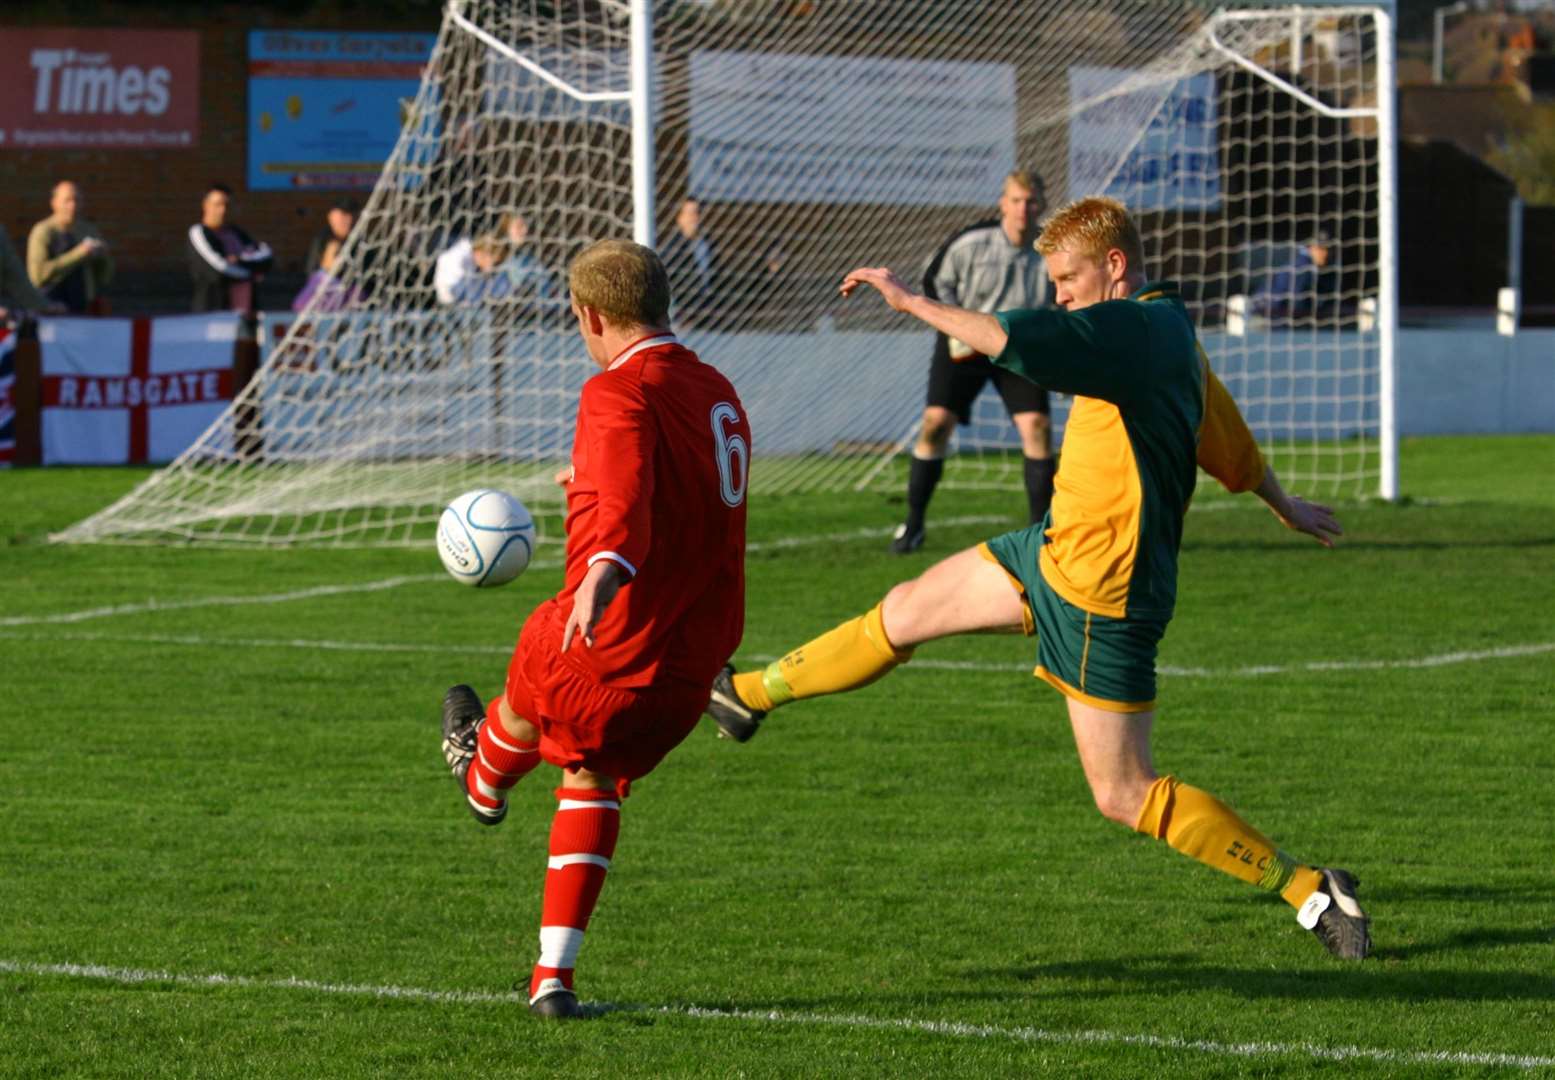 Lee Minshull puts in a cross for Ramsgate in an Isthmian Premier match against Horsham.